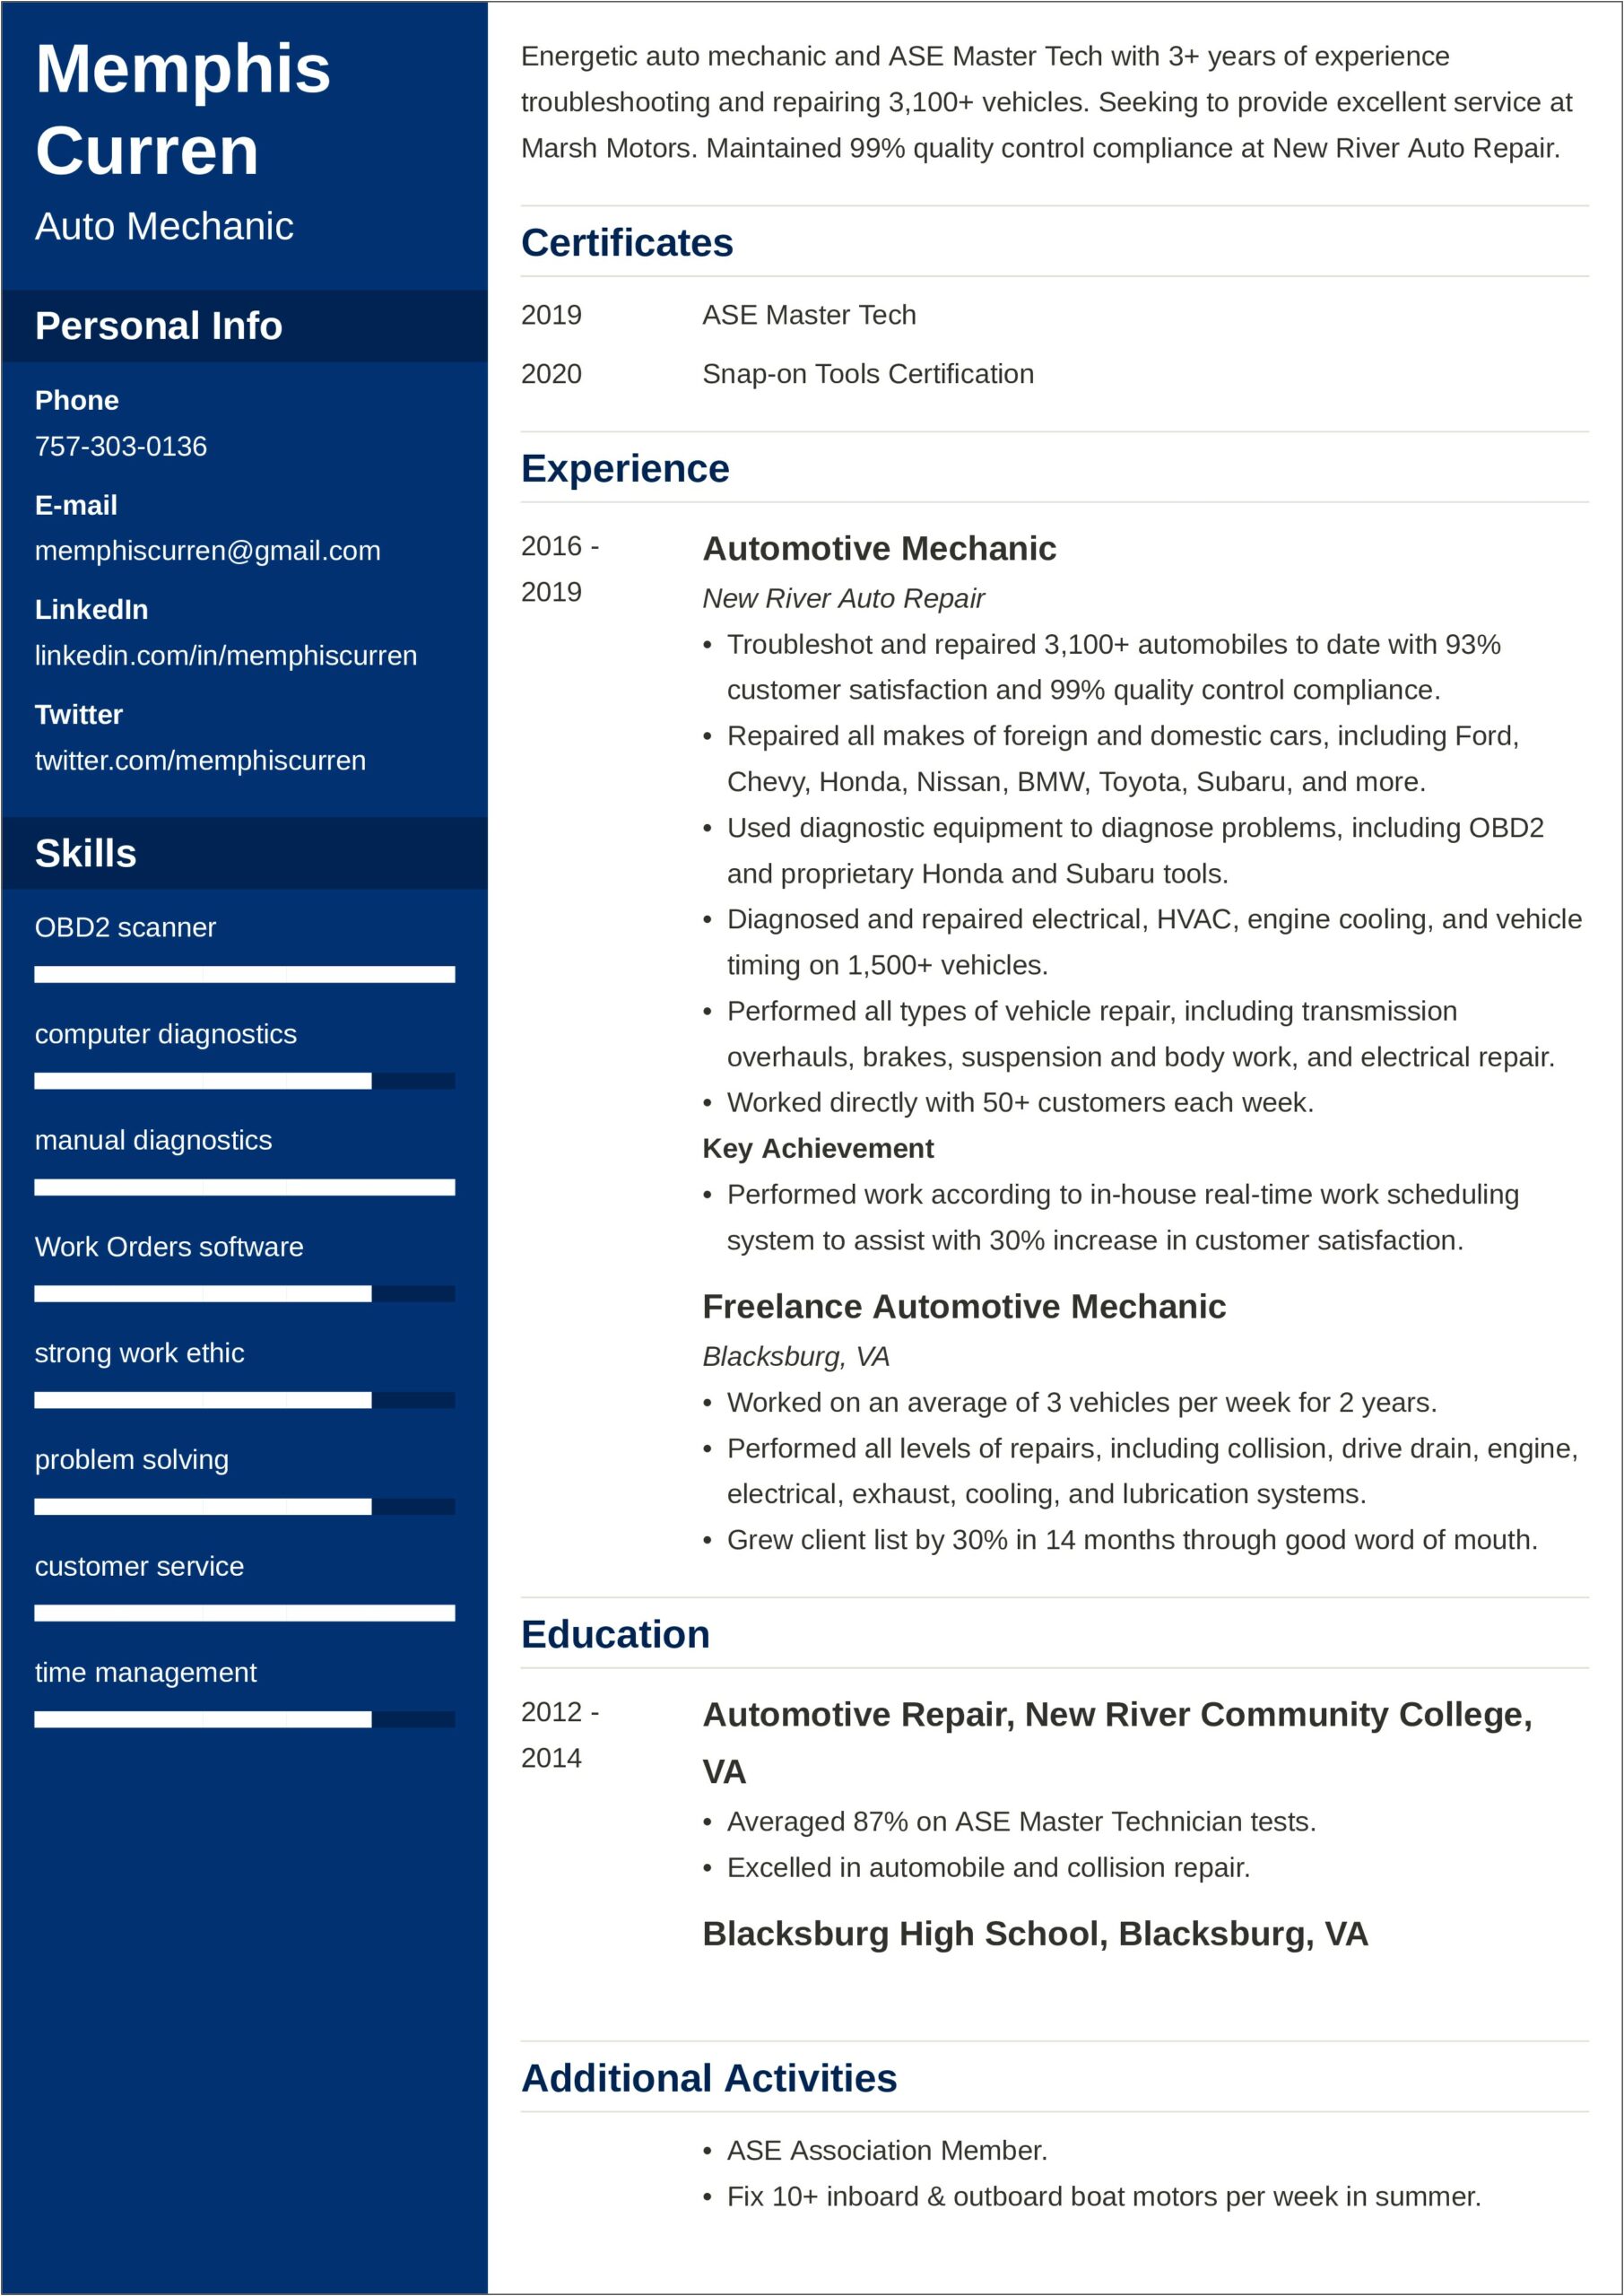 Resume Objective For Automobile Engineer